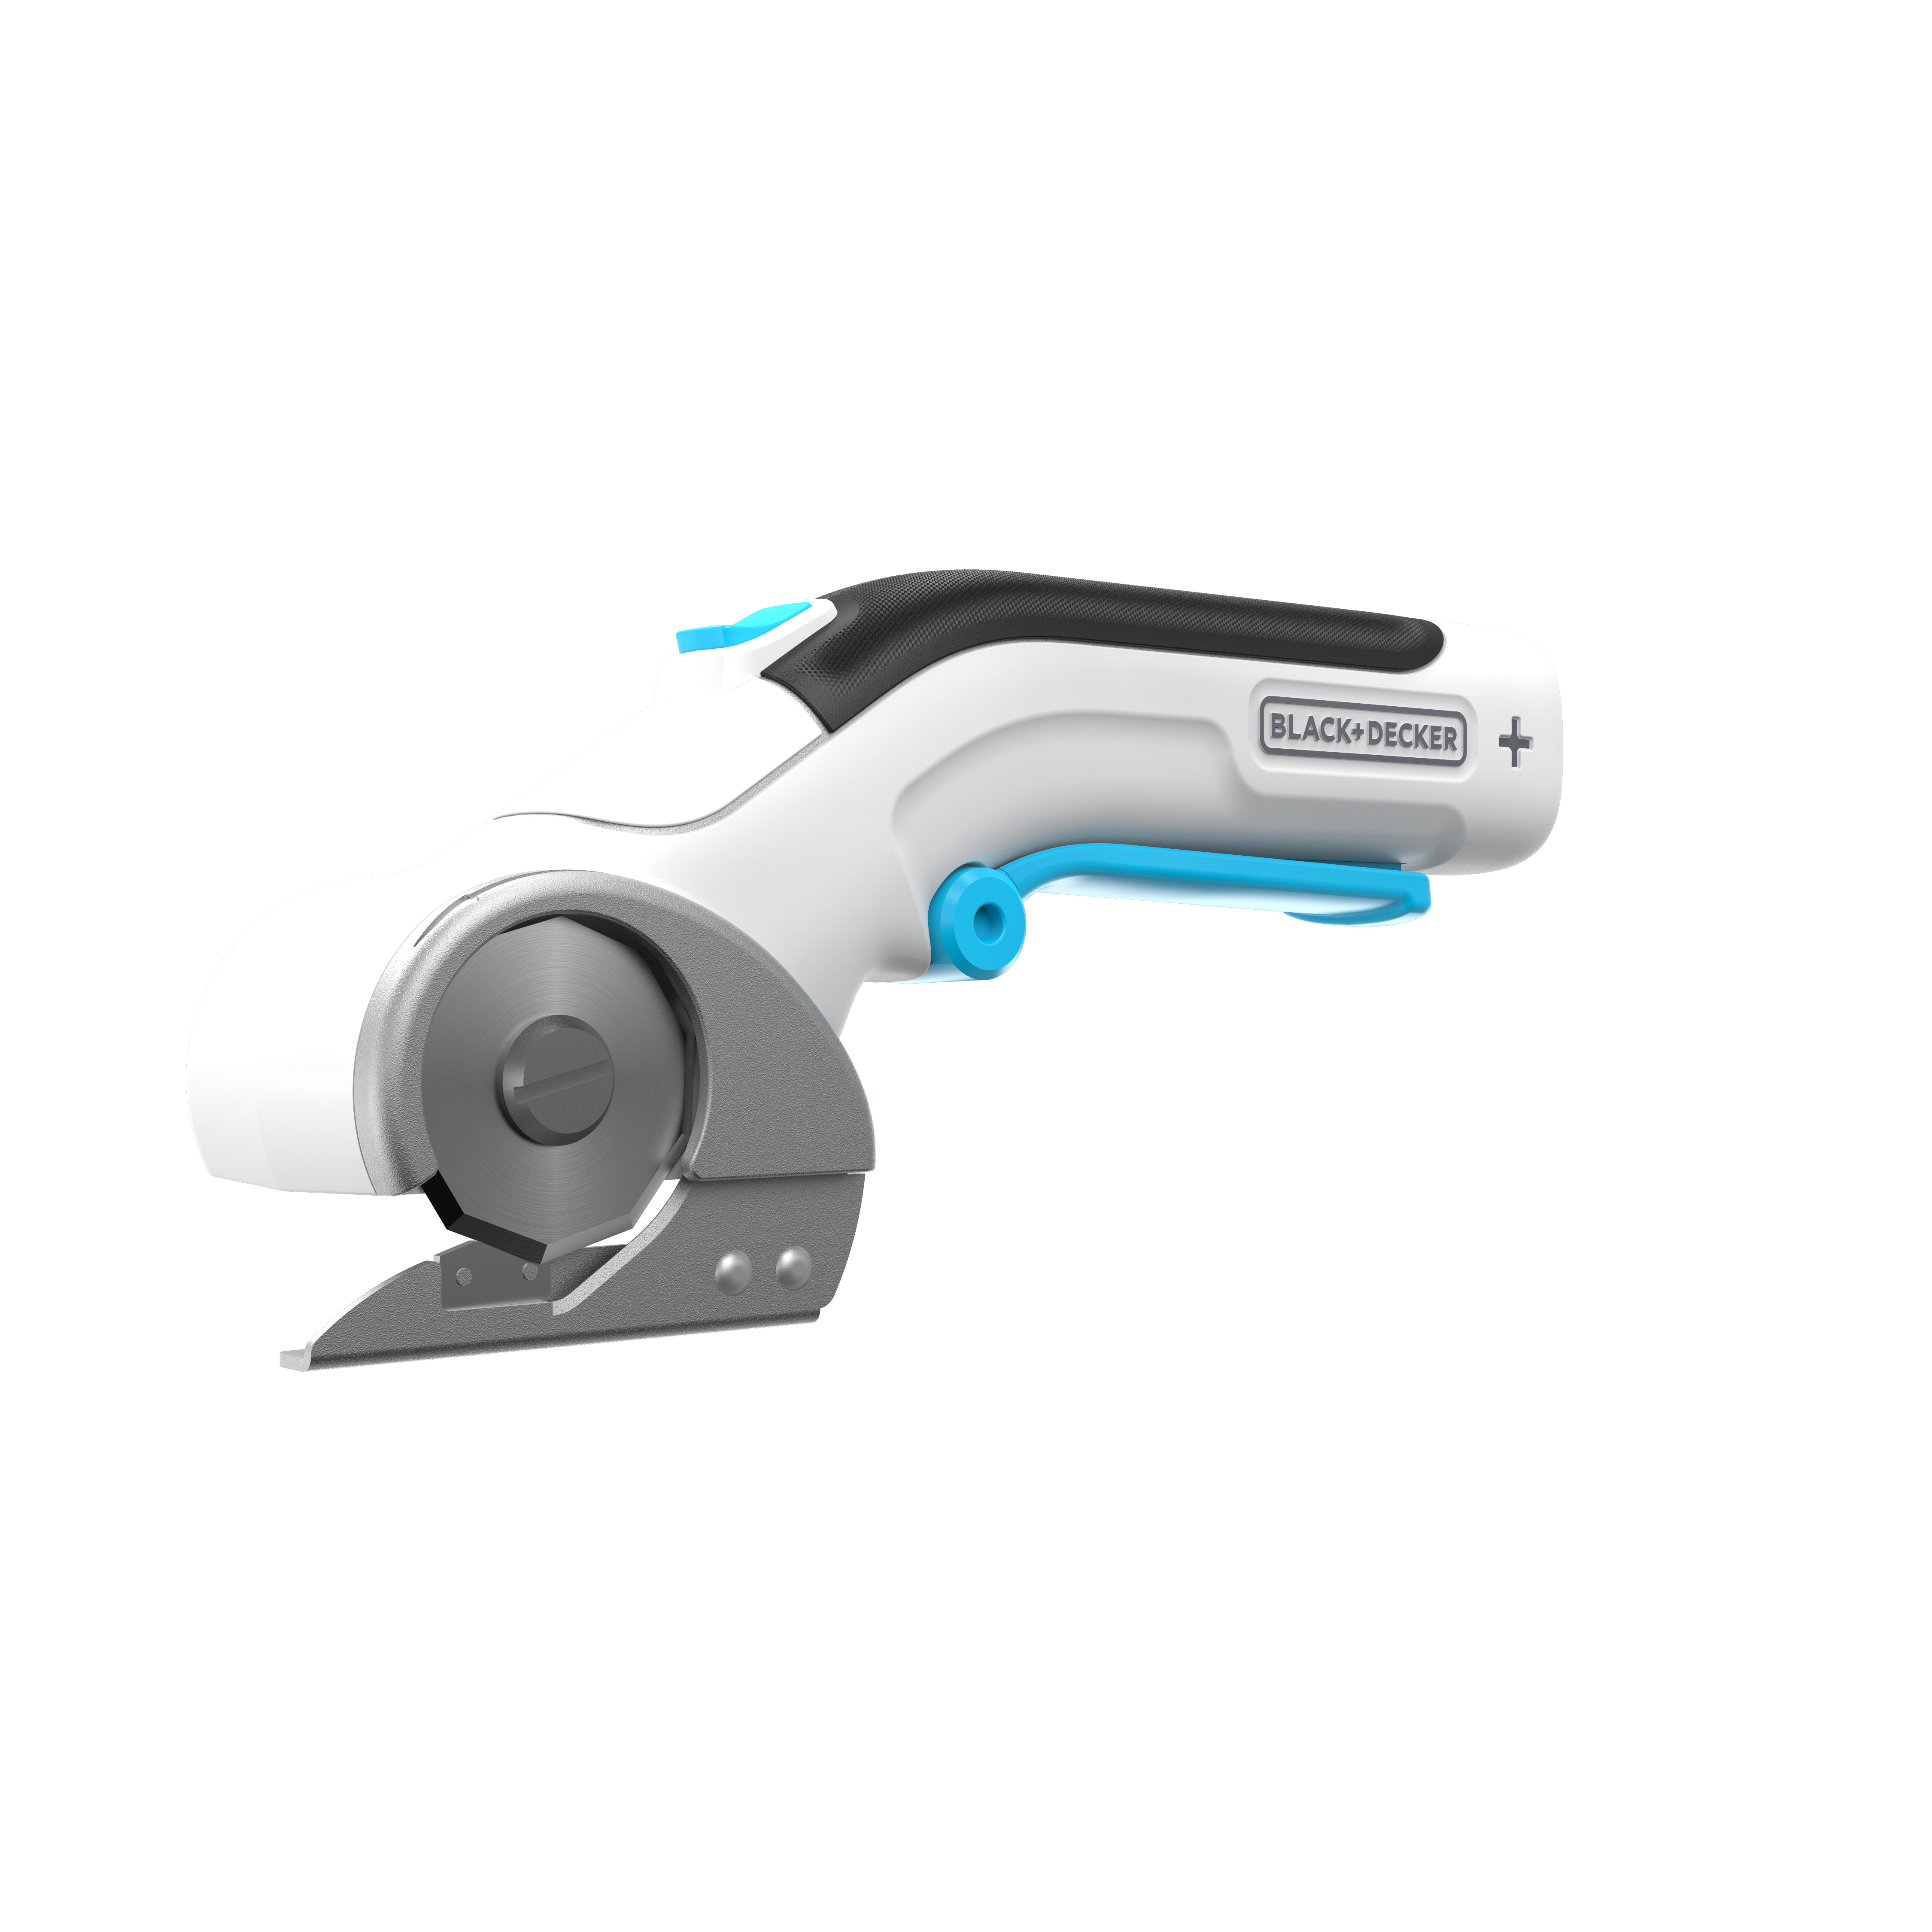 4V Max* Cordless Rotary Cutter, Usb Rechargeable - Black & Decker